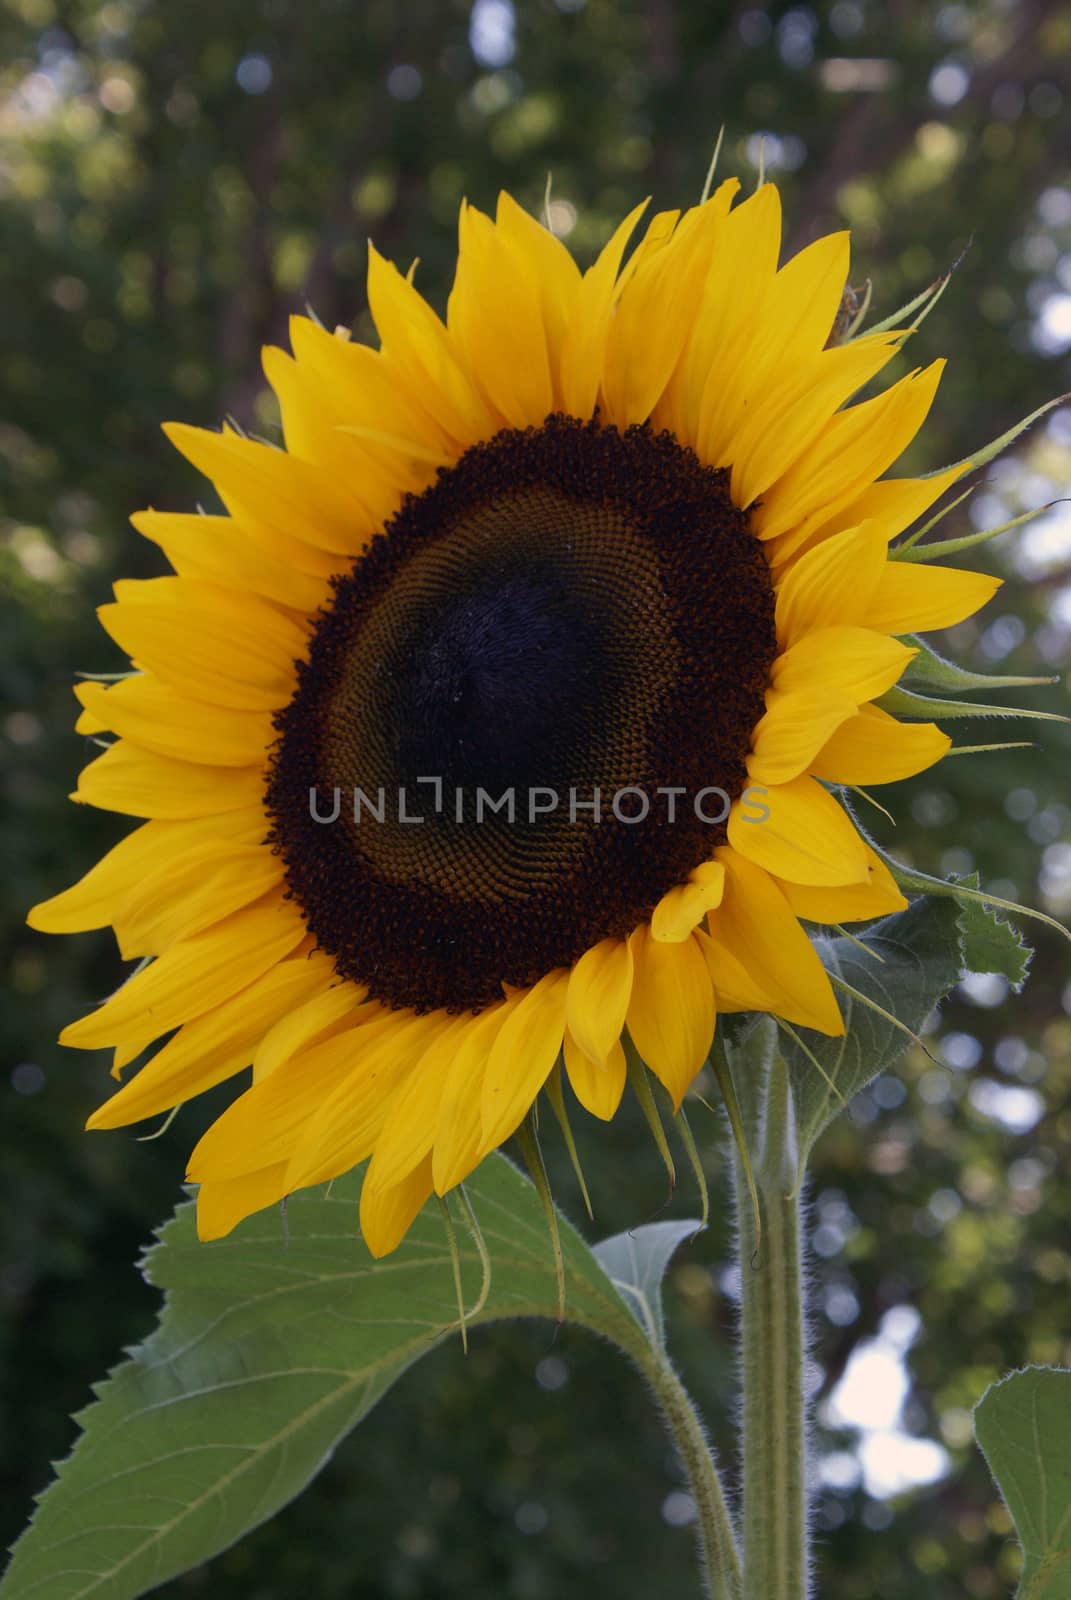 A beautiful Sunflower reaches high into the sky for its daily nourishment of the providing sunshine.